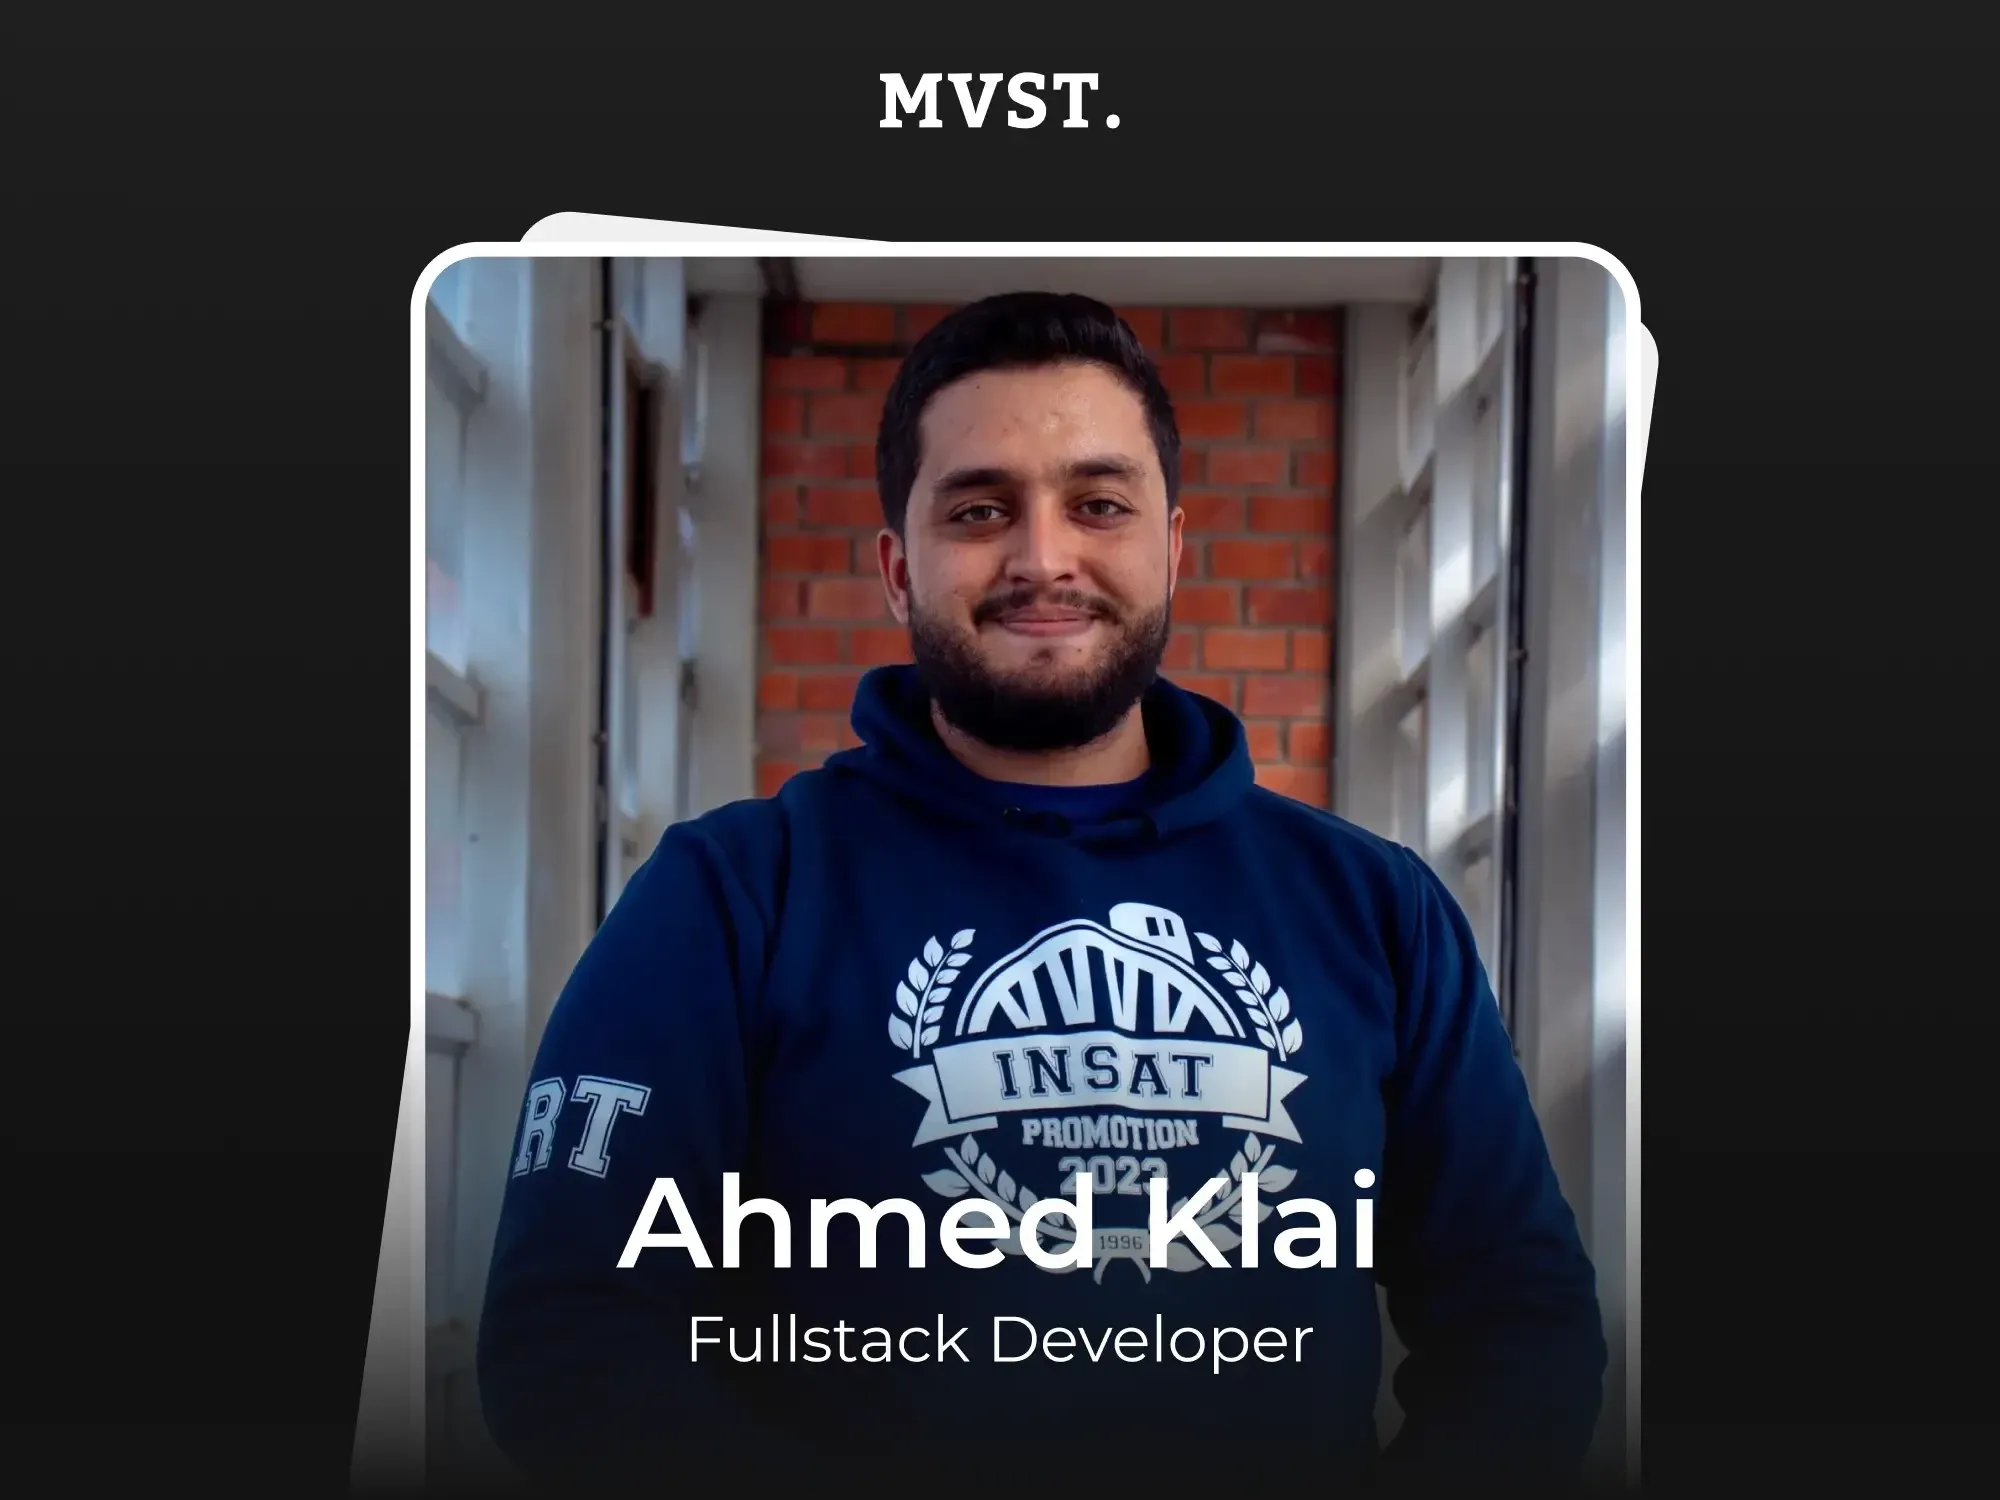 Welcome to MVST, Ahmed!